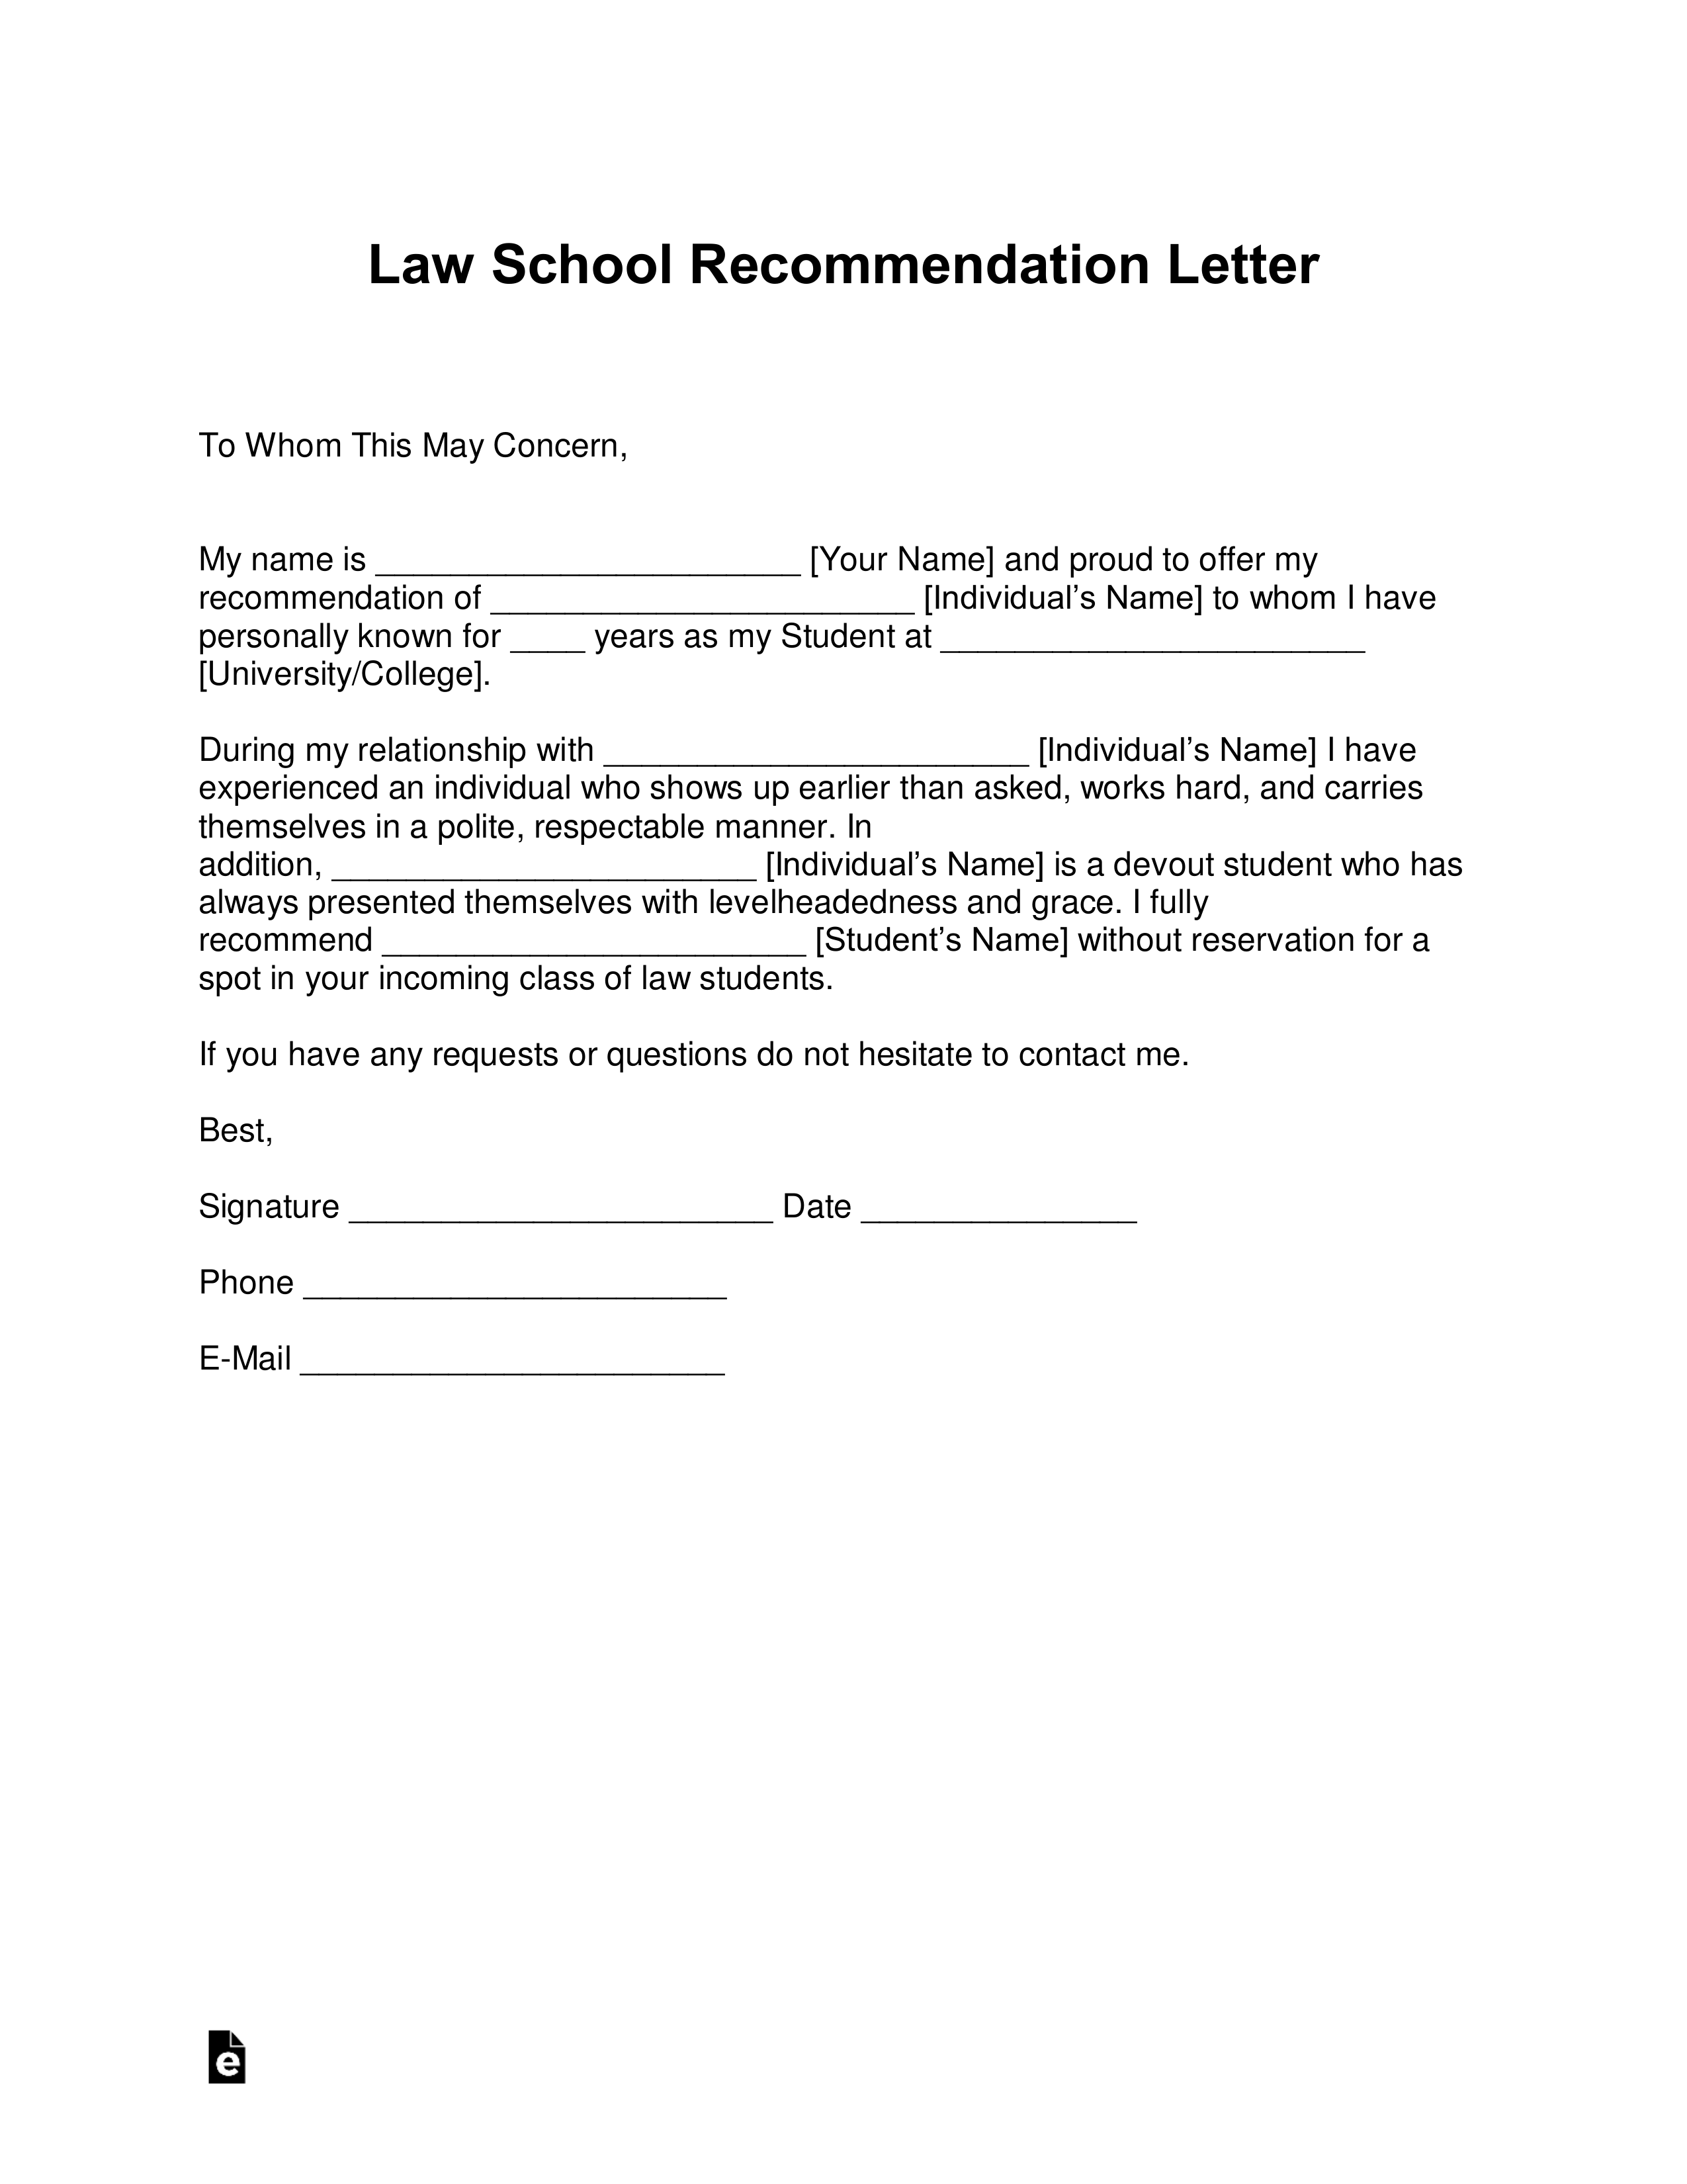 Free Letter Of Recommendation Template from eforms.com